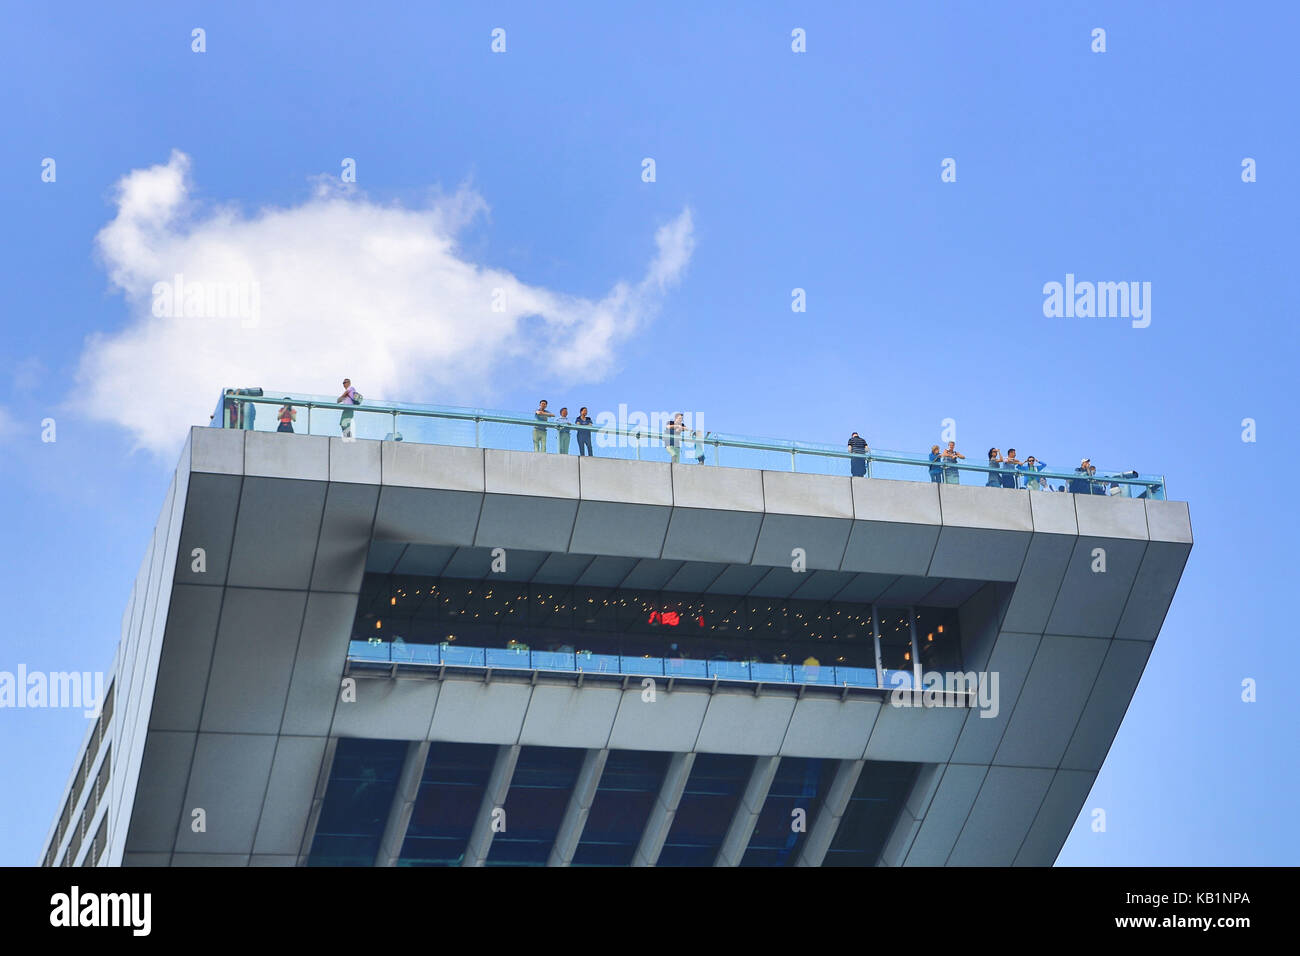 Tourists on the Peak Tower, Hong Kong, Stock Photo